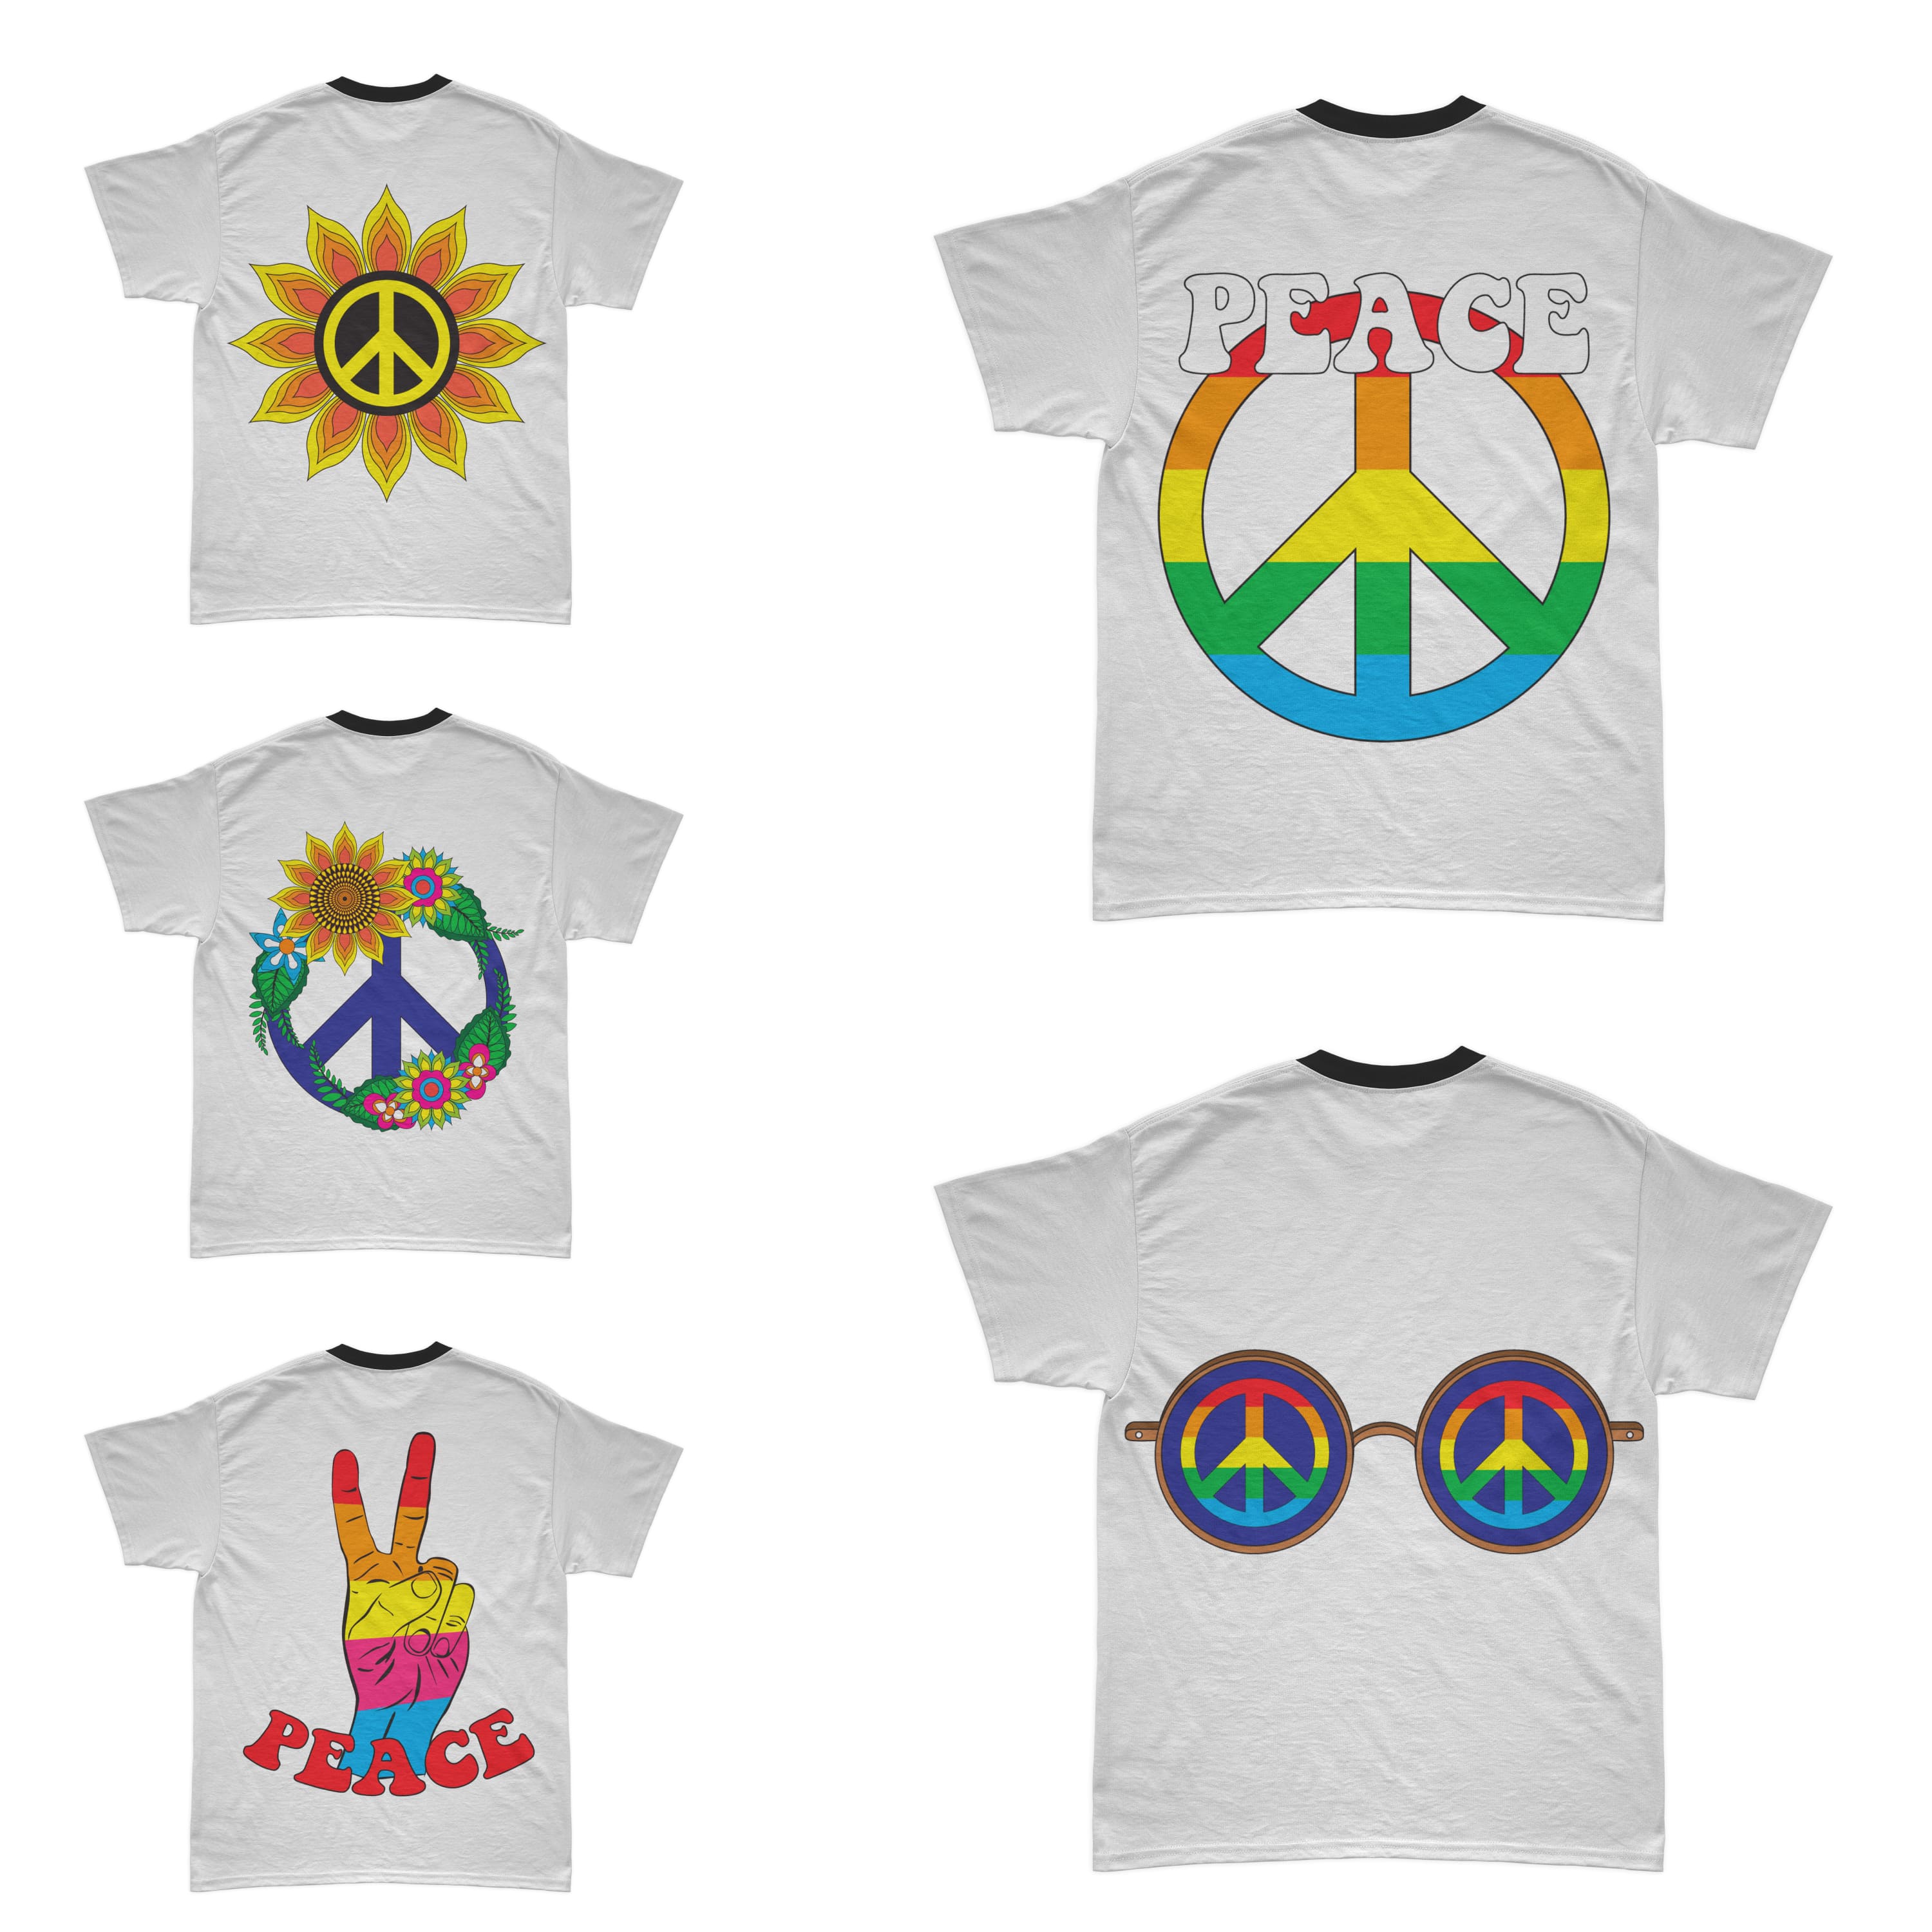 There are so many designs with hippie t-shirts.